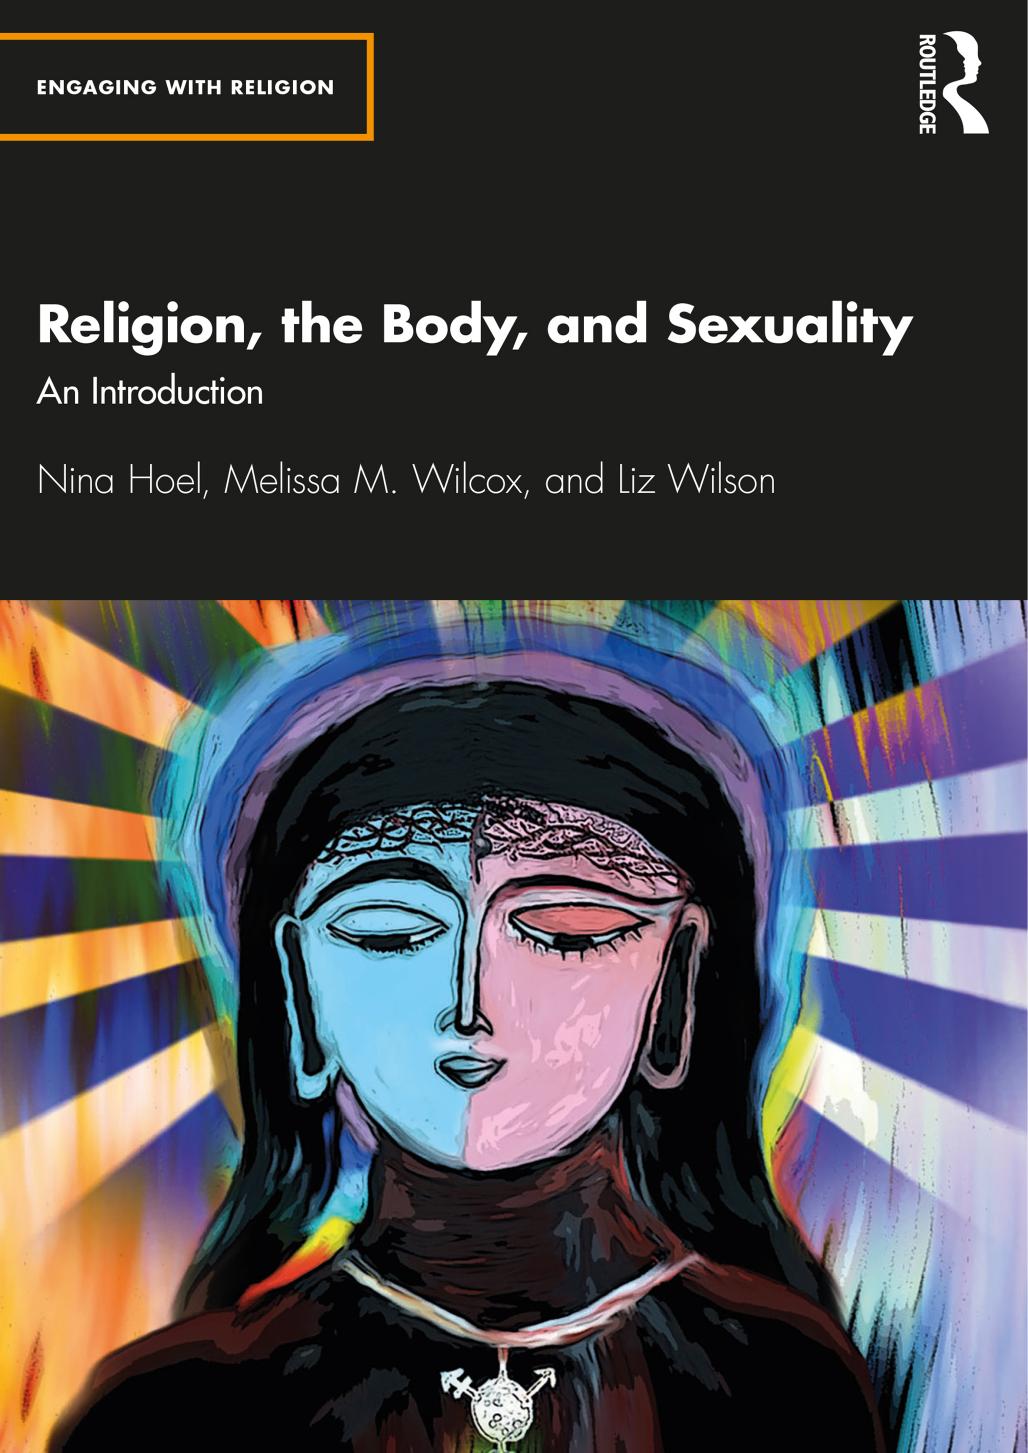 Religion, the Body, and Sexuality: An Introduction (Engaging with Religion) 1st Edition by Nina Hoel , Melissa M. Wilcox , Liz Wilson 